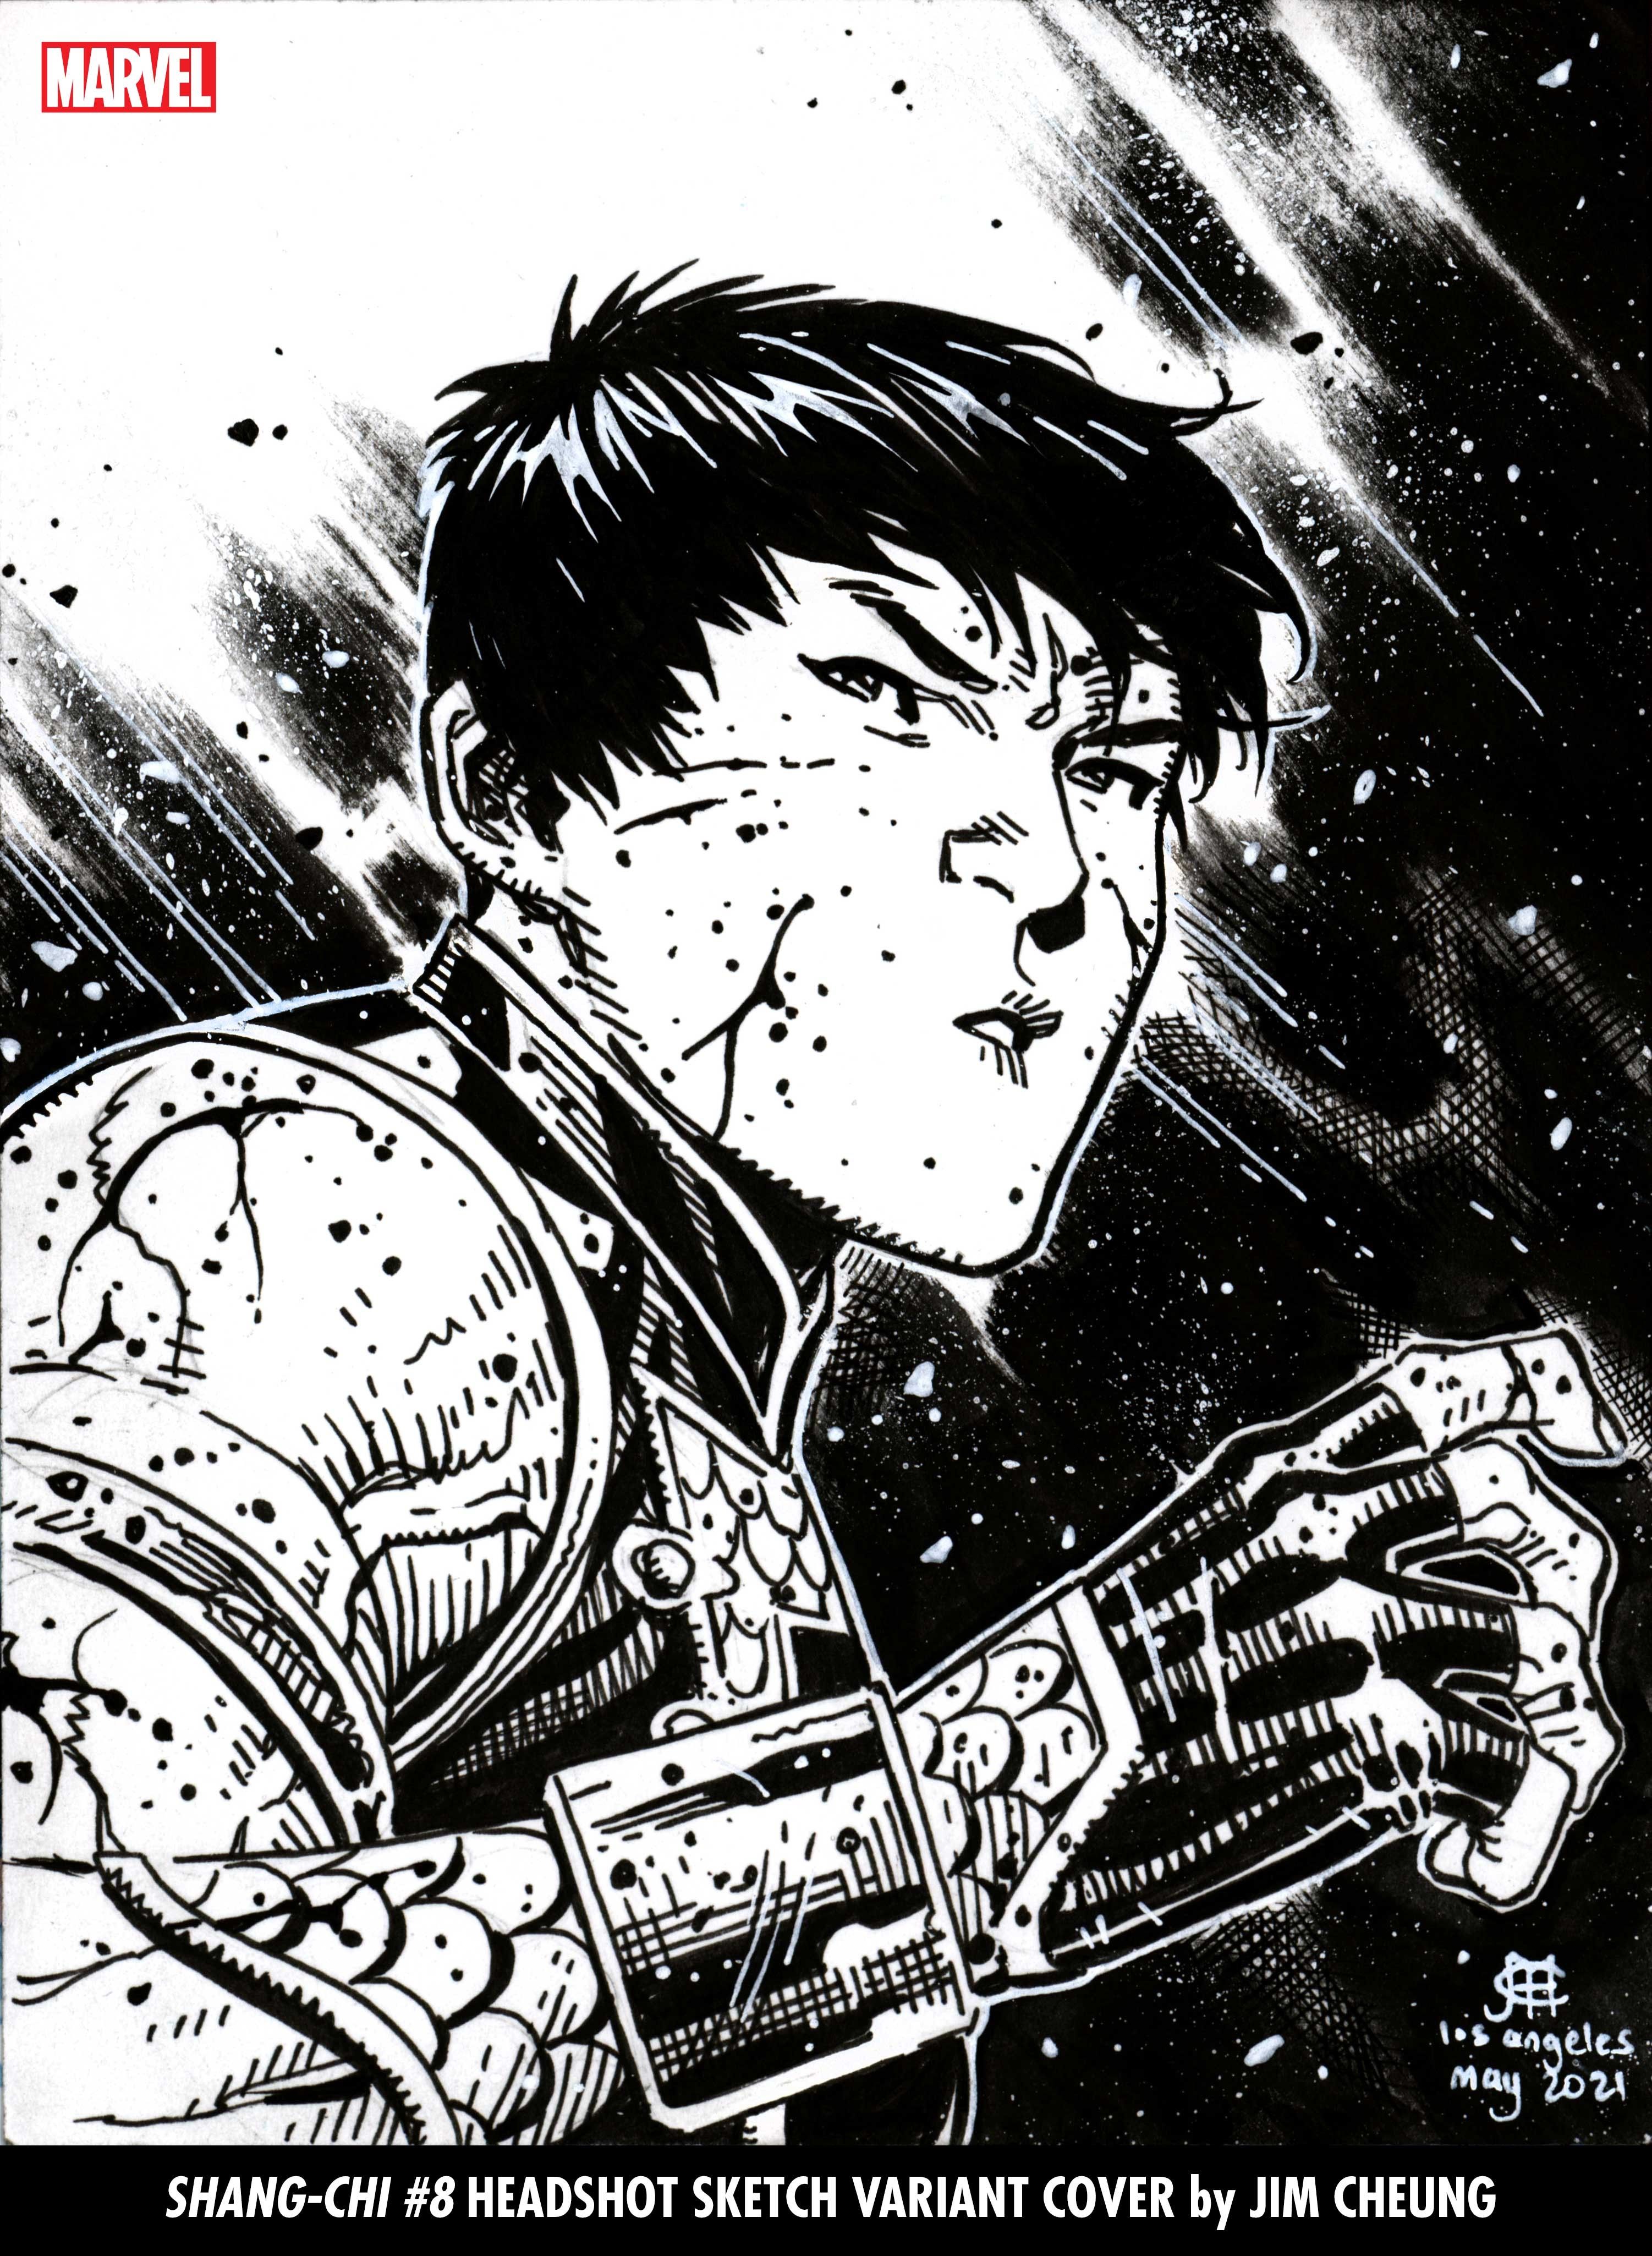 Black and white headshot cover of Shang-Chi by Jim Cheung